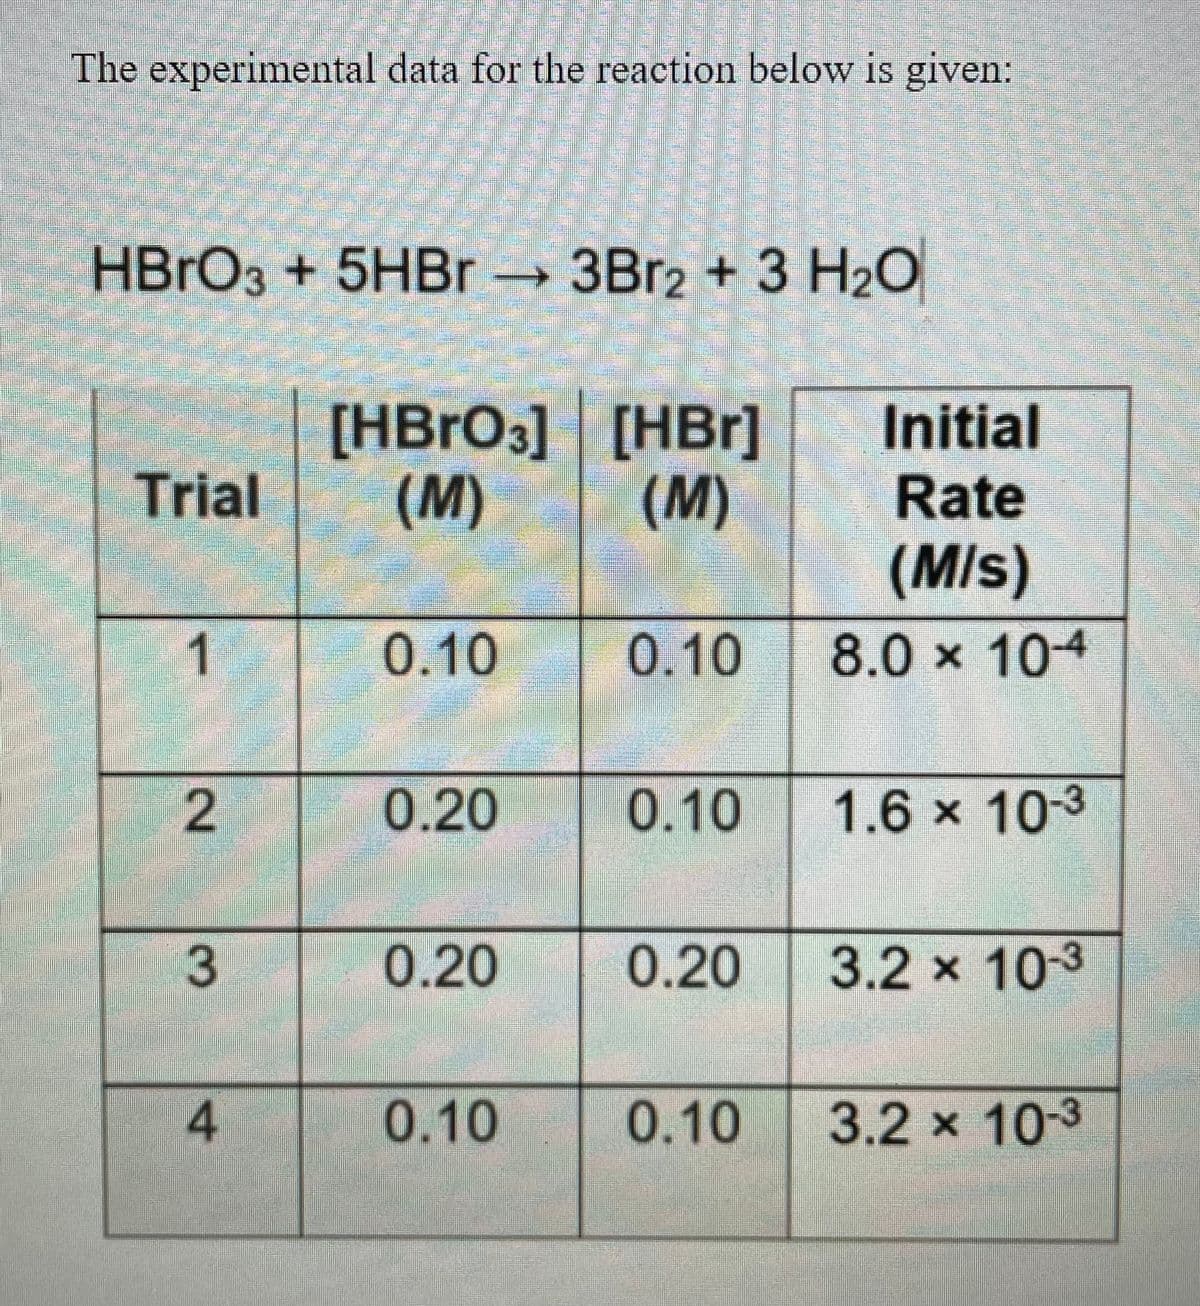 The experimental data for the reaction below is given:
HBRO3 + 5HBR
3Br2 + 3 H2O
[HBRO3] [HBr]
(M)
Initial
Rate
Trial
(M/s)
0.10
0.10
8.0 x 104
0.20
0.10
1.6 x 10-3
3
0.20
0.20
3.2 x 10-3
0.10
0.10
3.2x10-3
2.
4.
